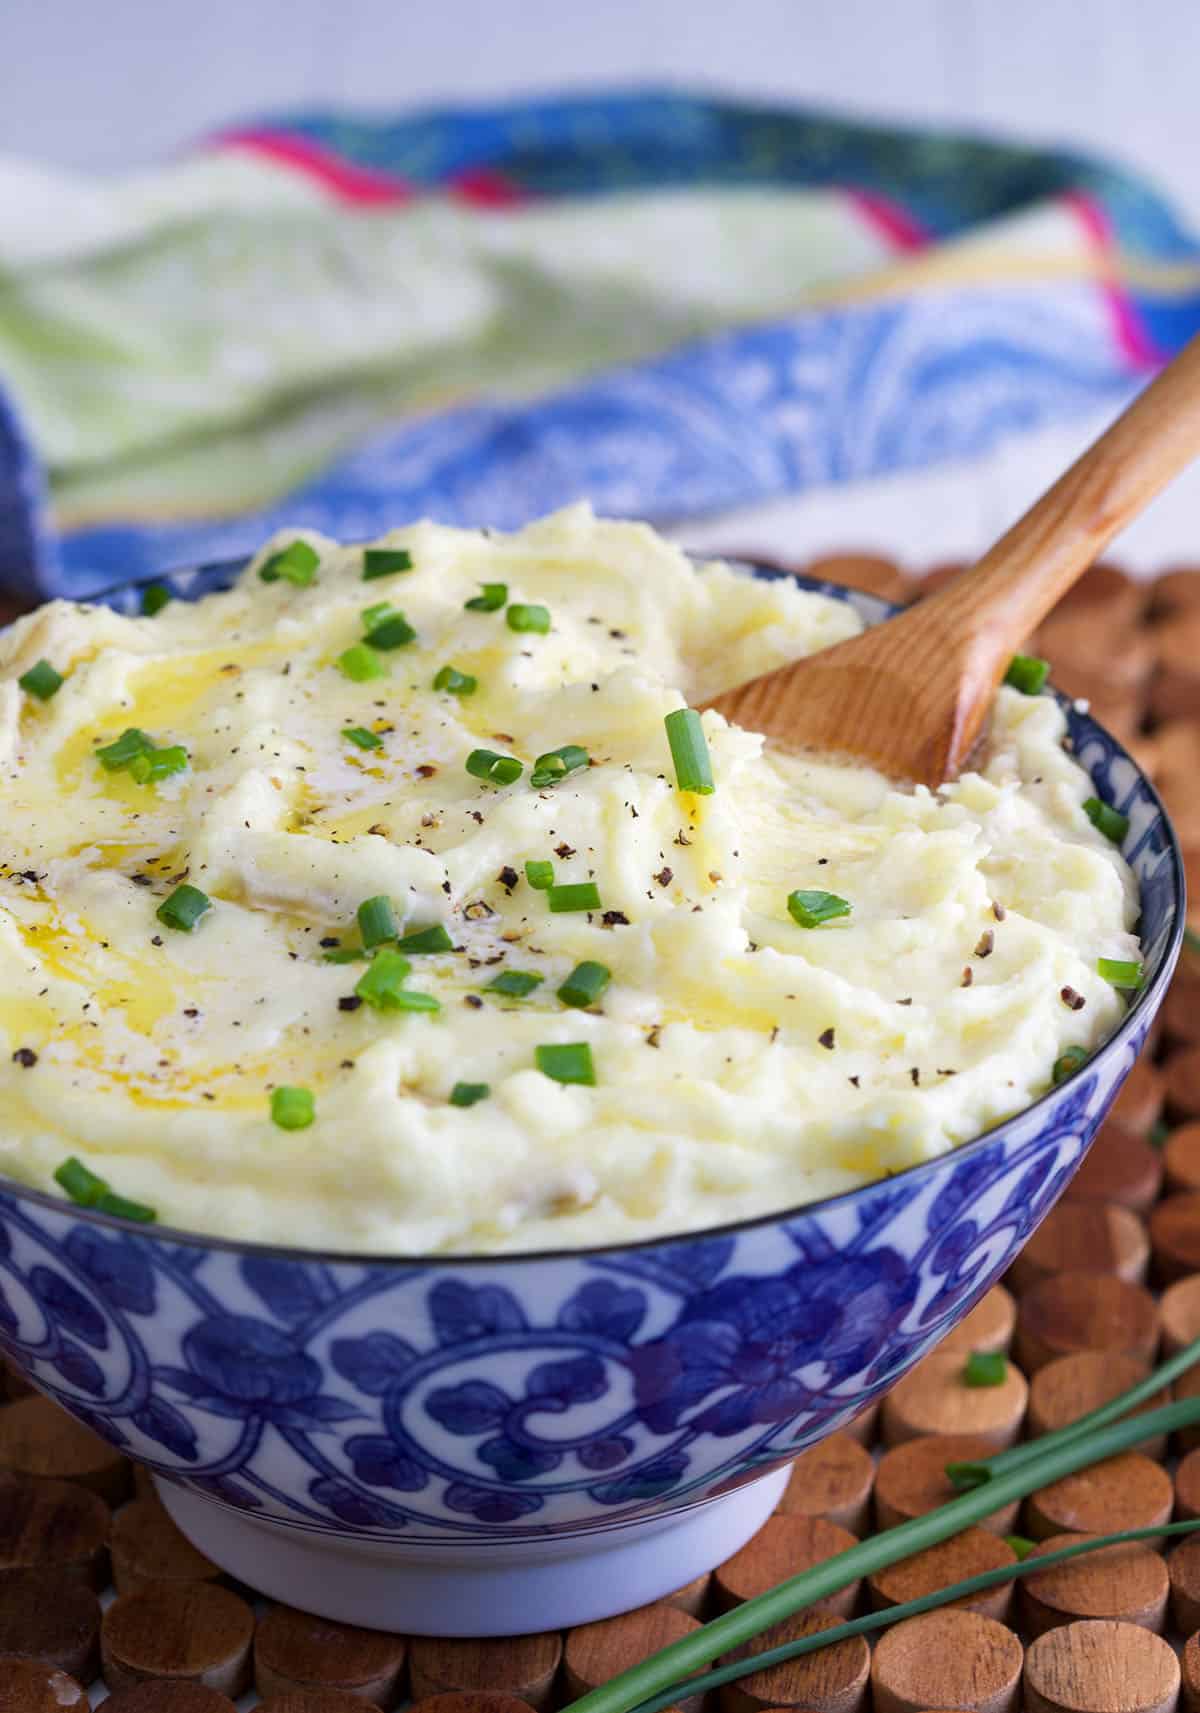 Mashed potatoes in a blue and white bowl topped with chives and butter with a wooden spoon dug inside.